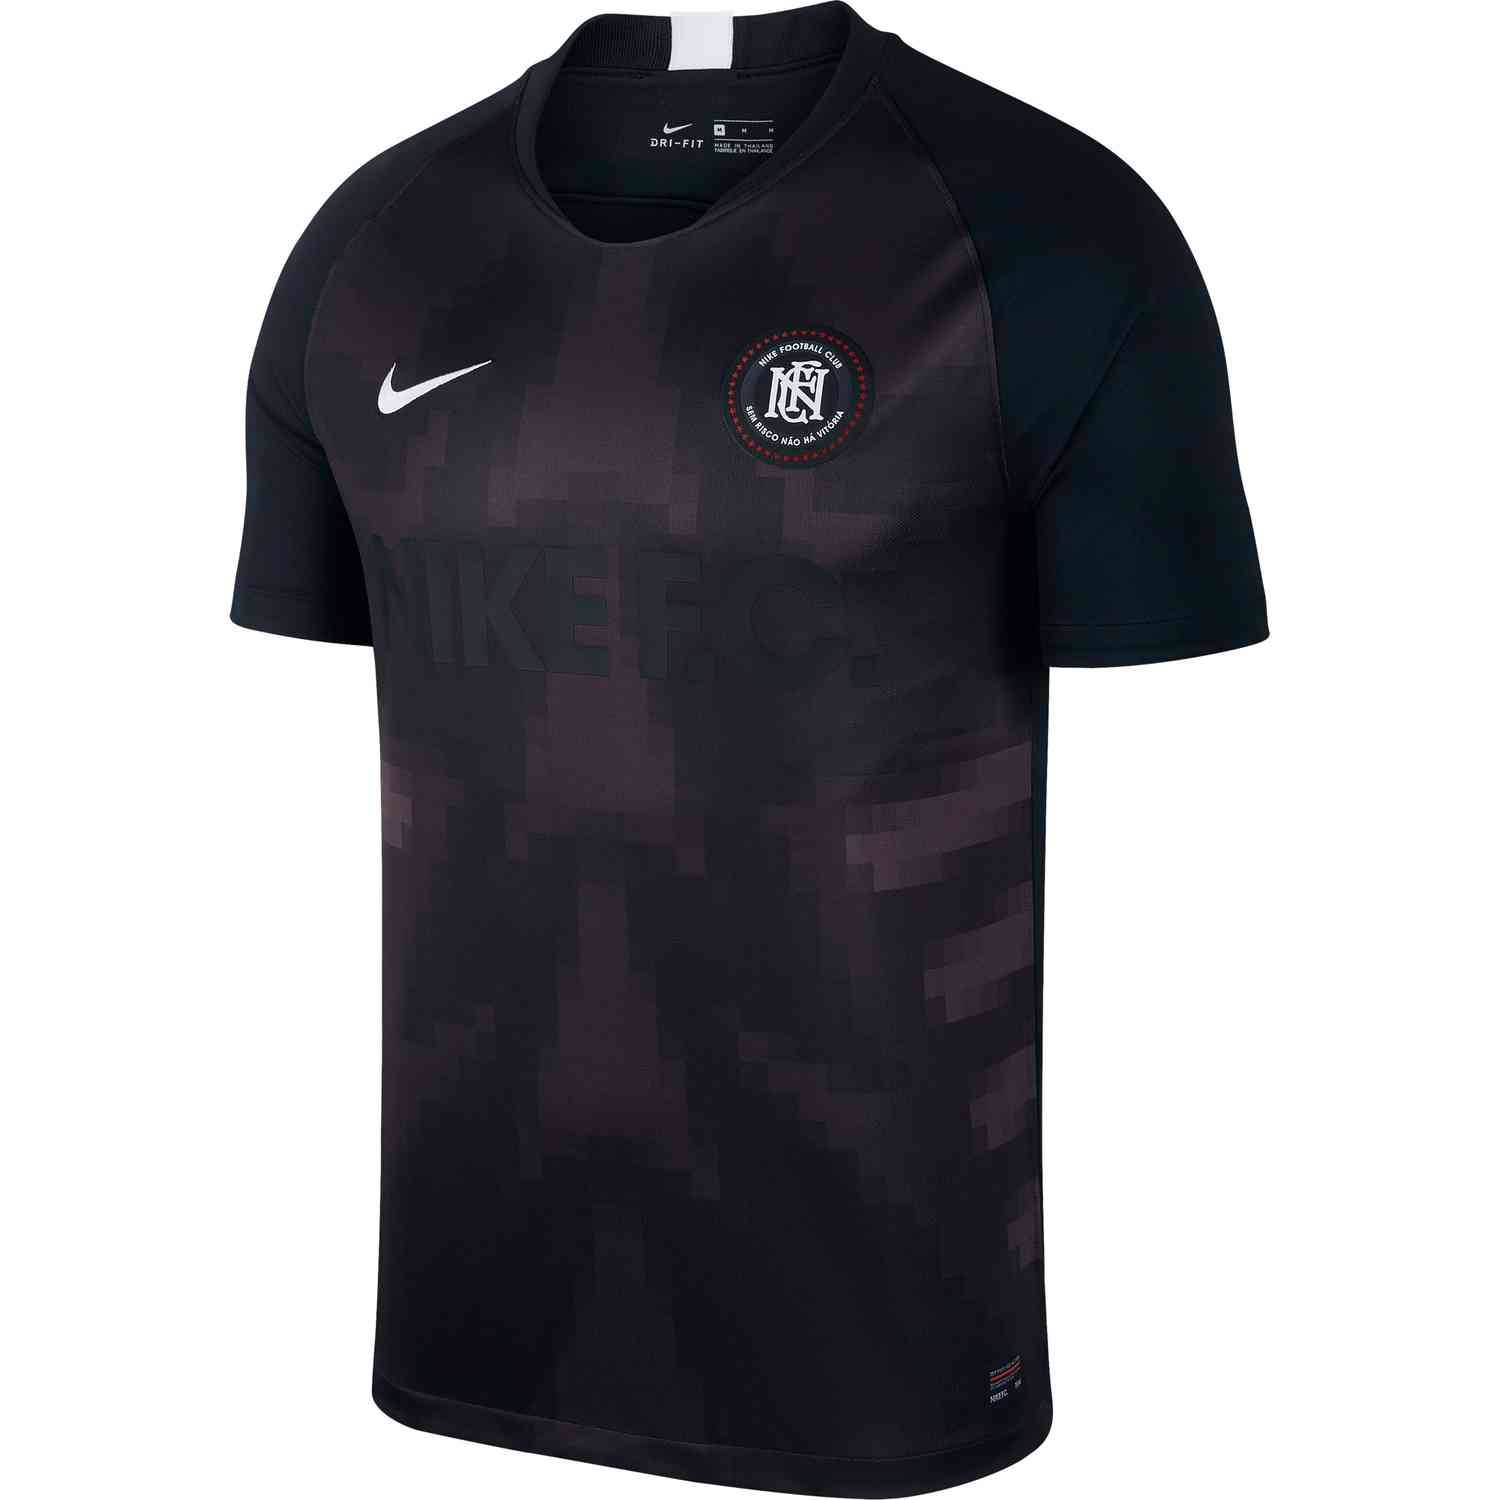 nike fc jersey black and white